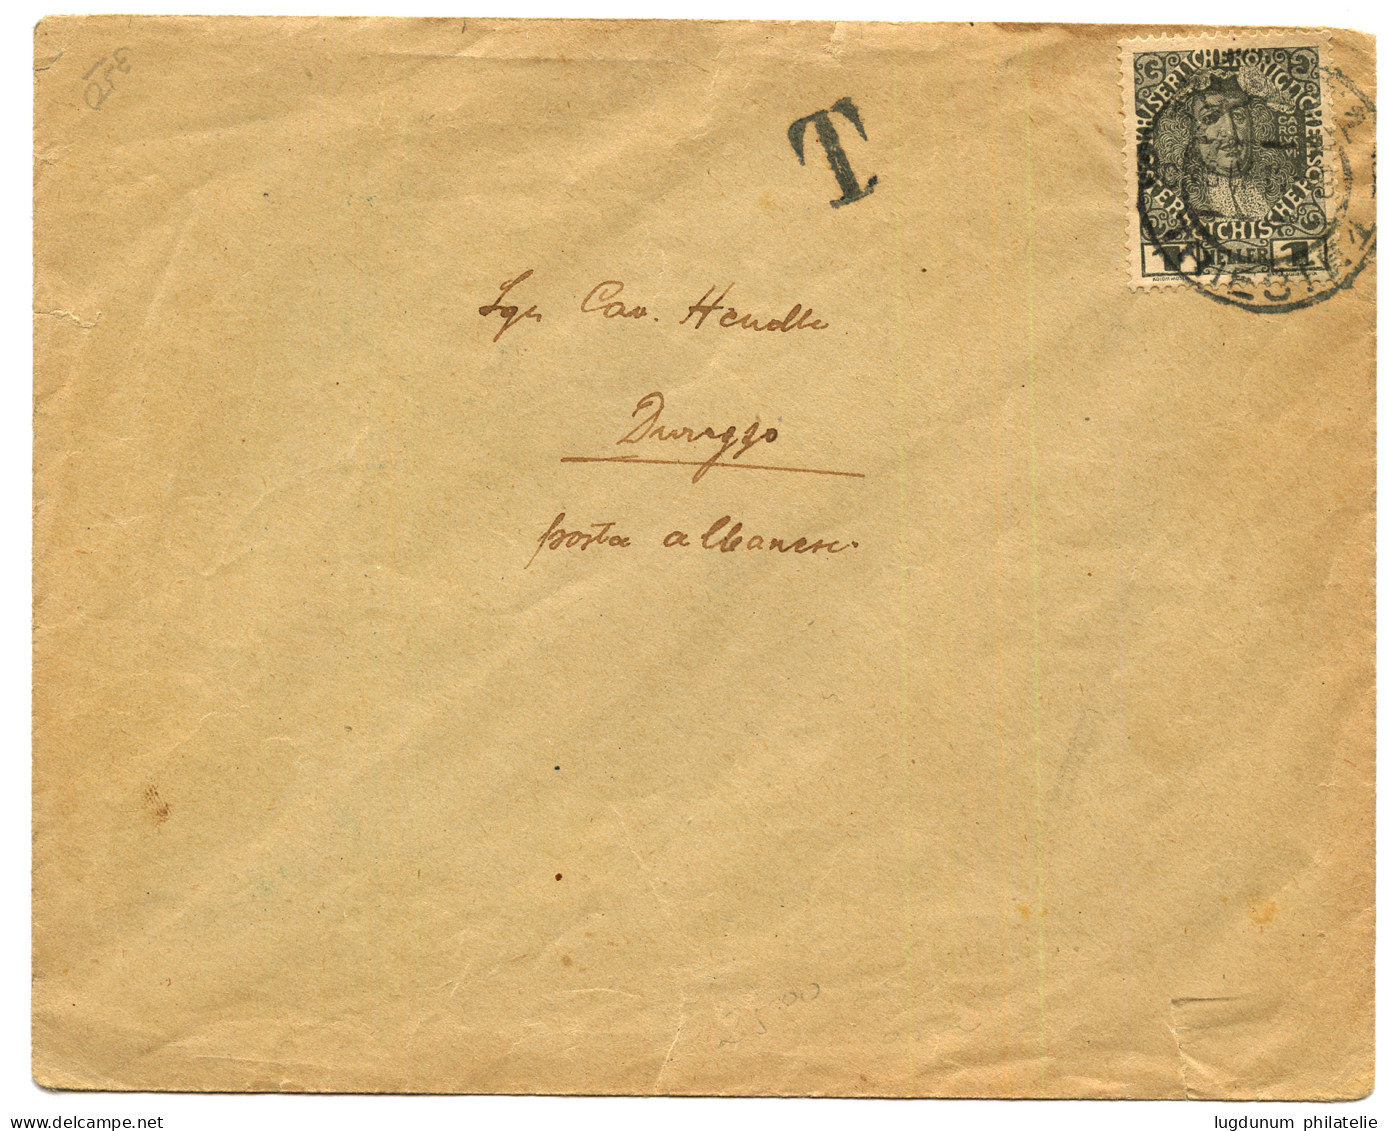 ALBANIA : 1914 AUSTRIA 1h Canc. TRIESTE + "T" Tax Marking On Envelope (PRINTED MATTER Rate) On Envelope To DURAZZO Taxed - Albanien